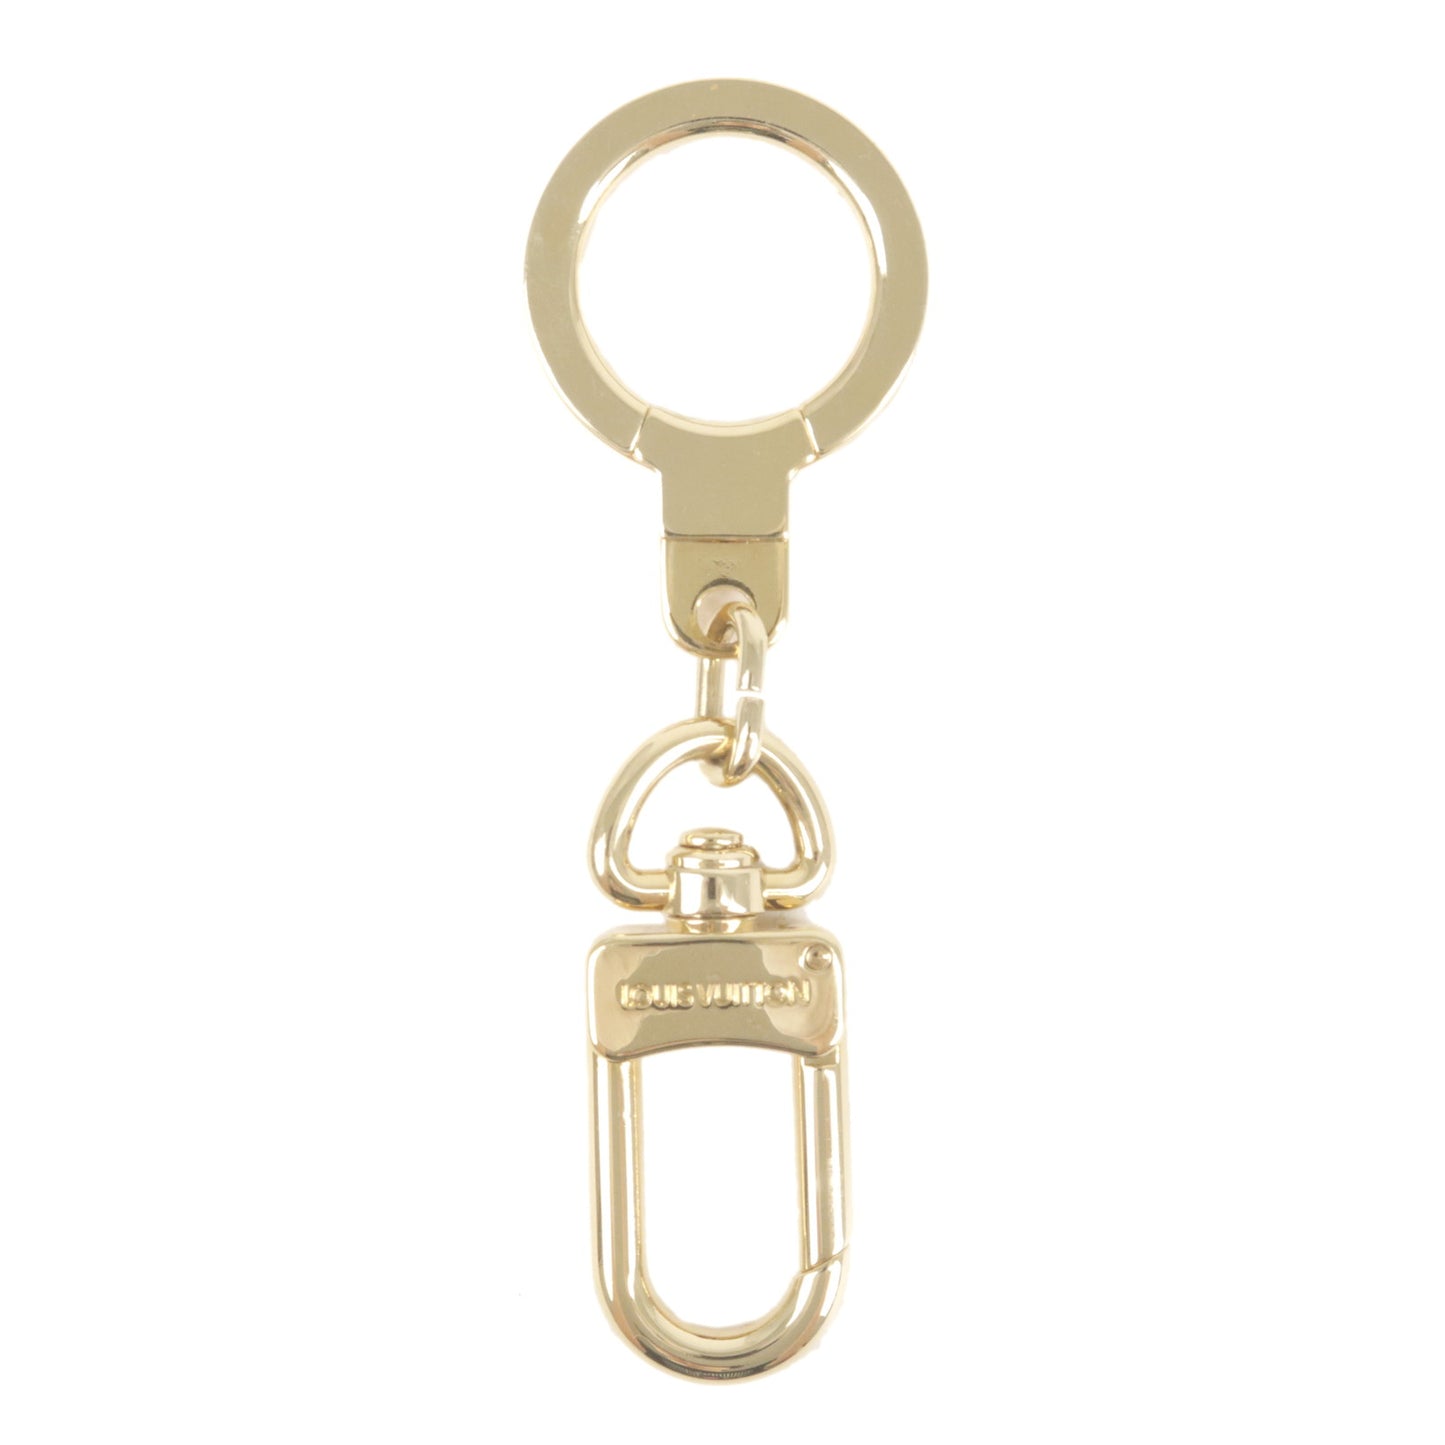 Louis Vuitton Keychain Anocre Gold M62694 bag Charm Key ring beauty  condition